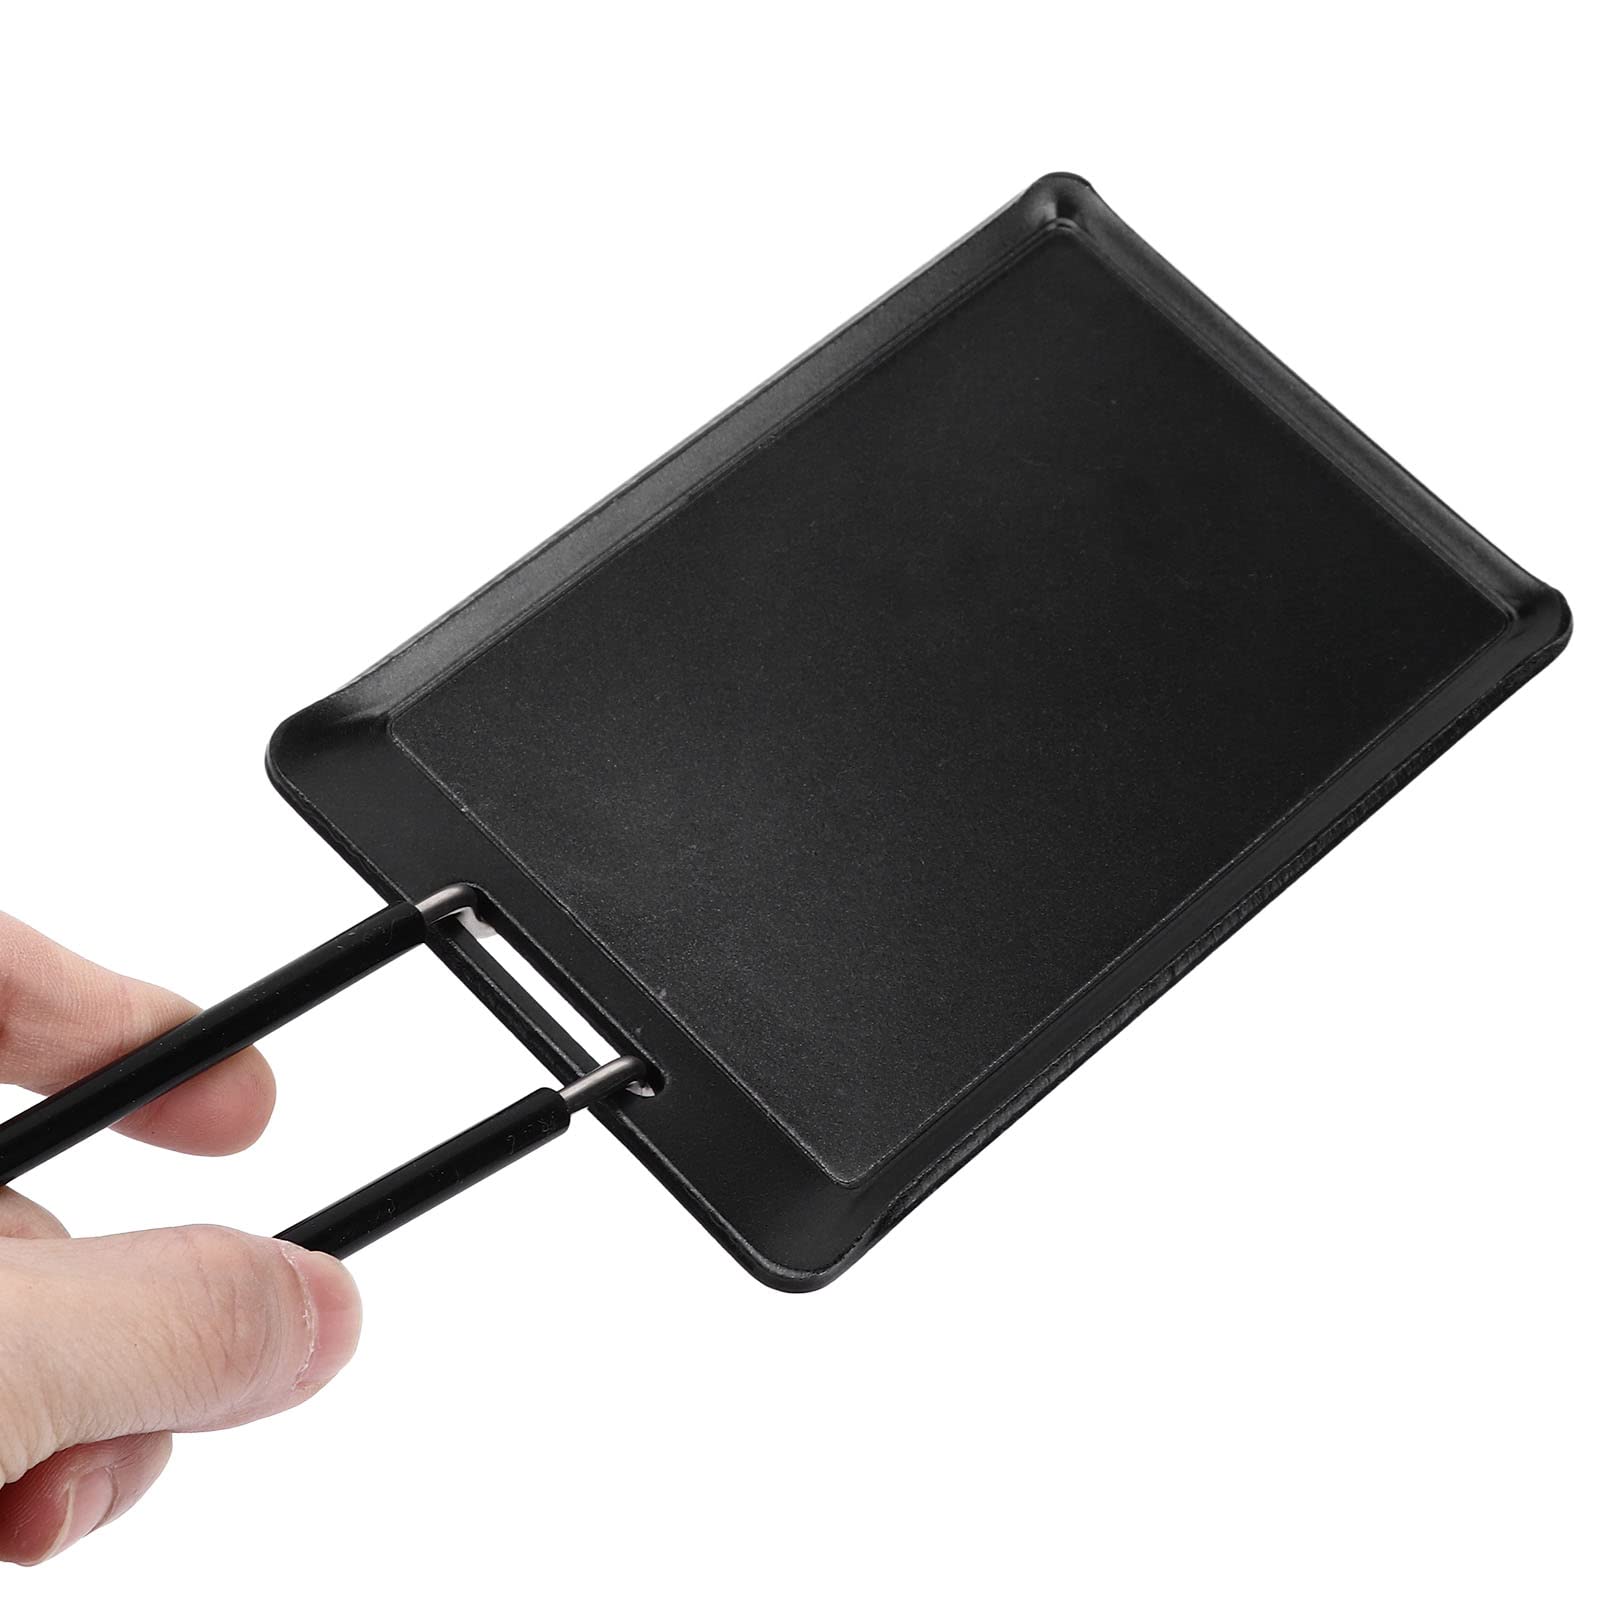 Grill Pan, Small Nonstick BBQ Grill Pan with Detachable Handle, 5.1 x 3.4 in Multipurpose BBQ Grilling Pan Steak Frying Pan Heating Evenly and Quickly for Kitchen, Traveling, Camping